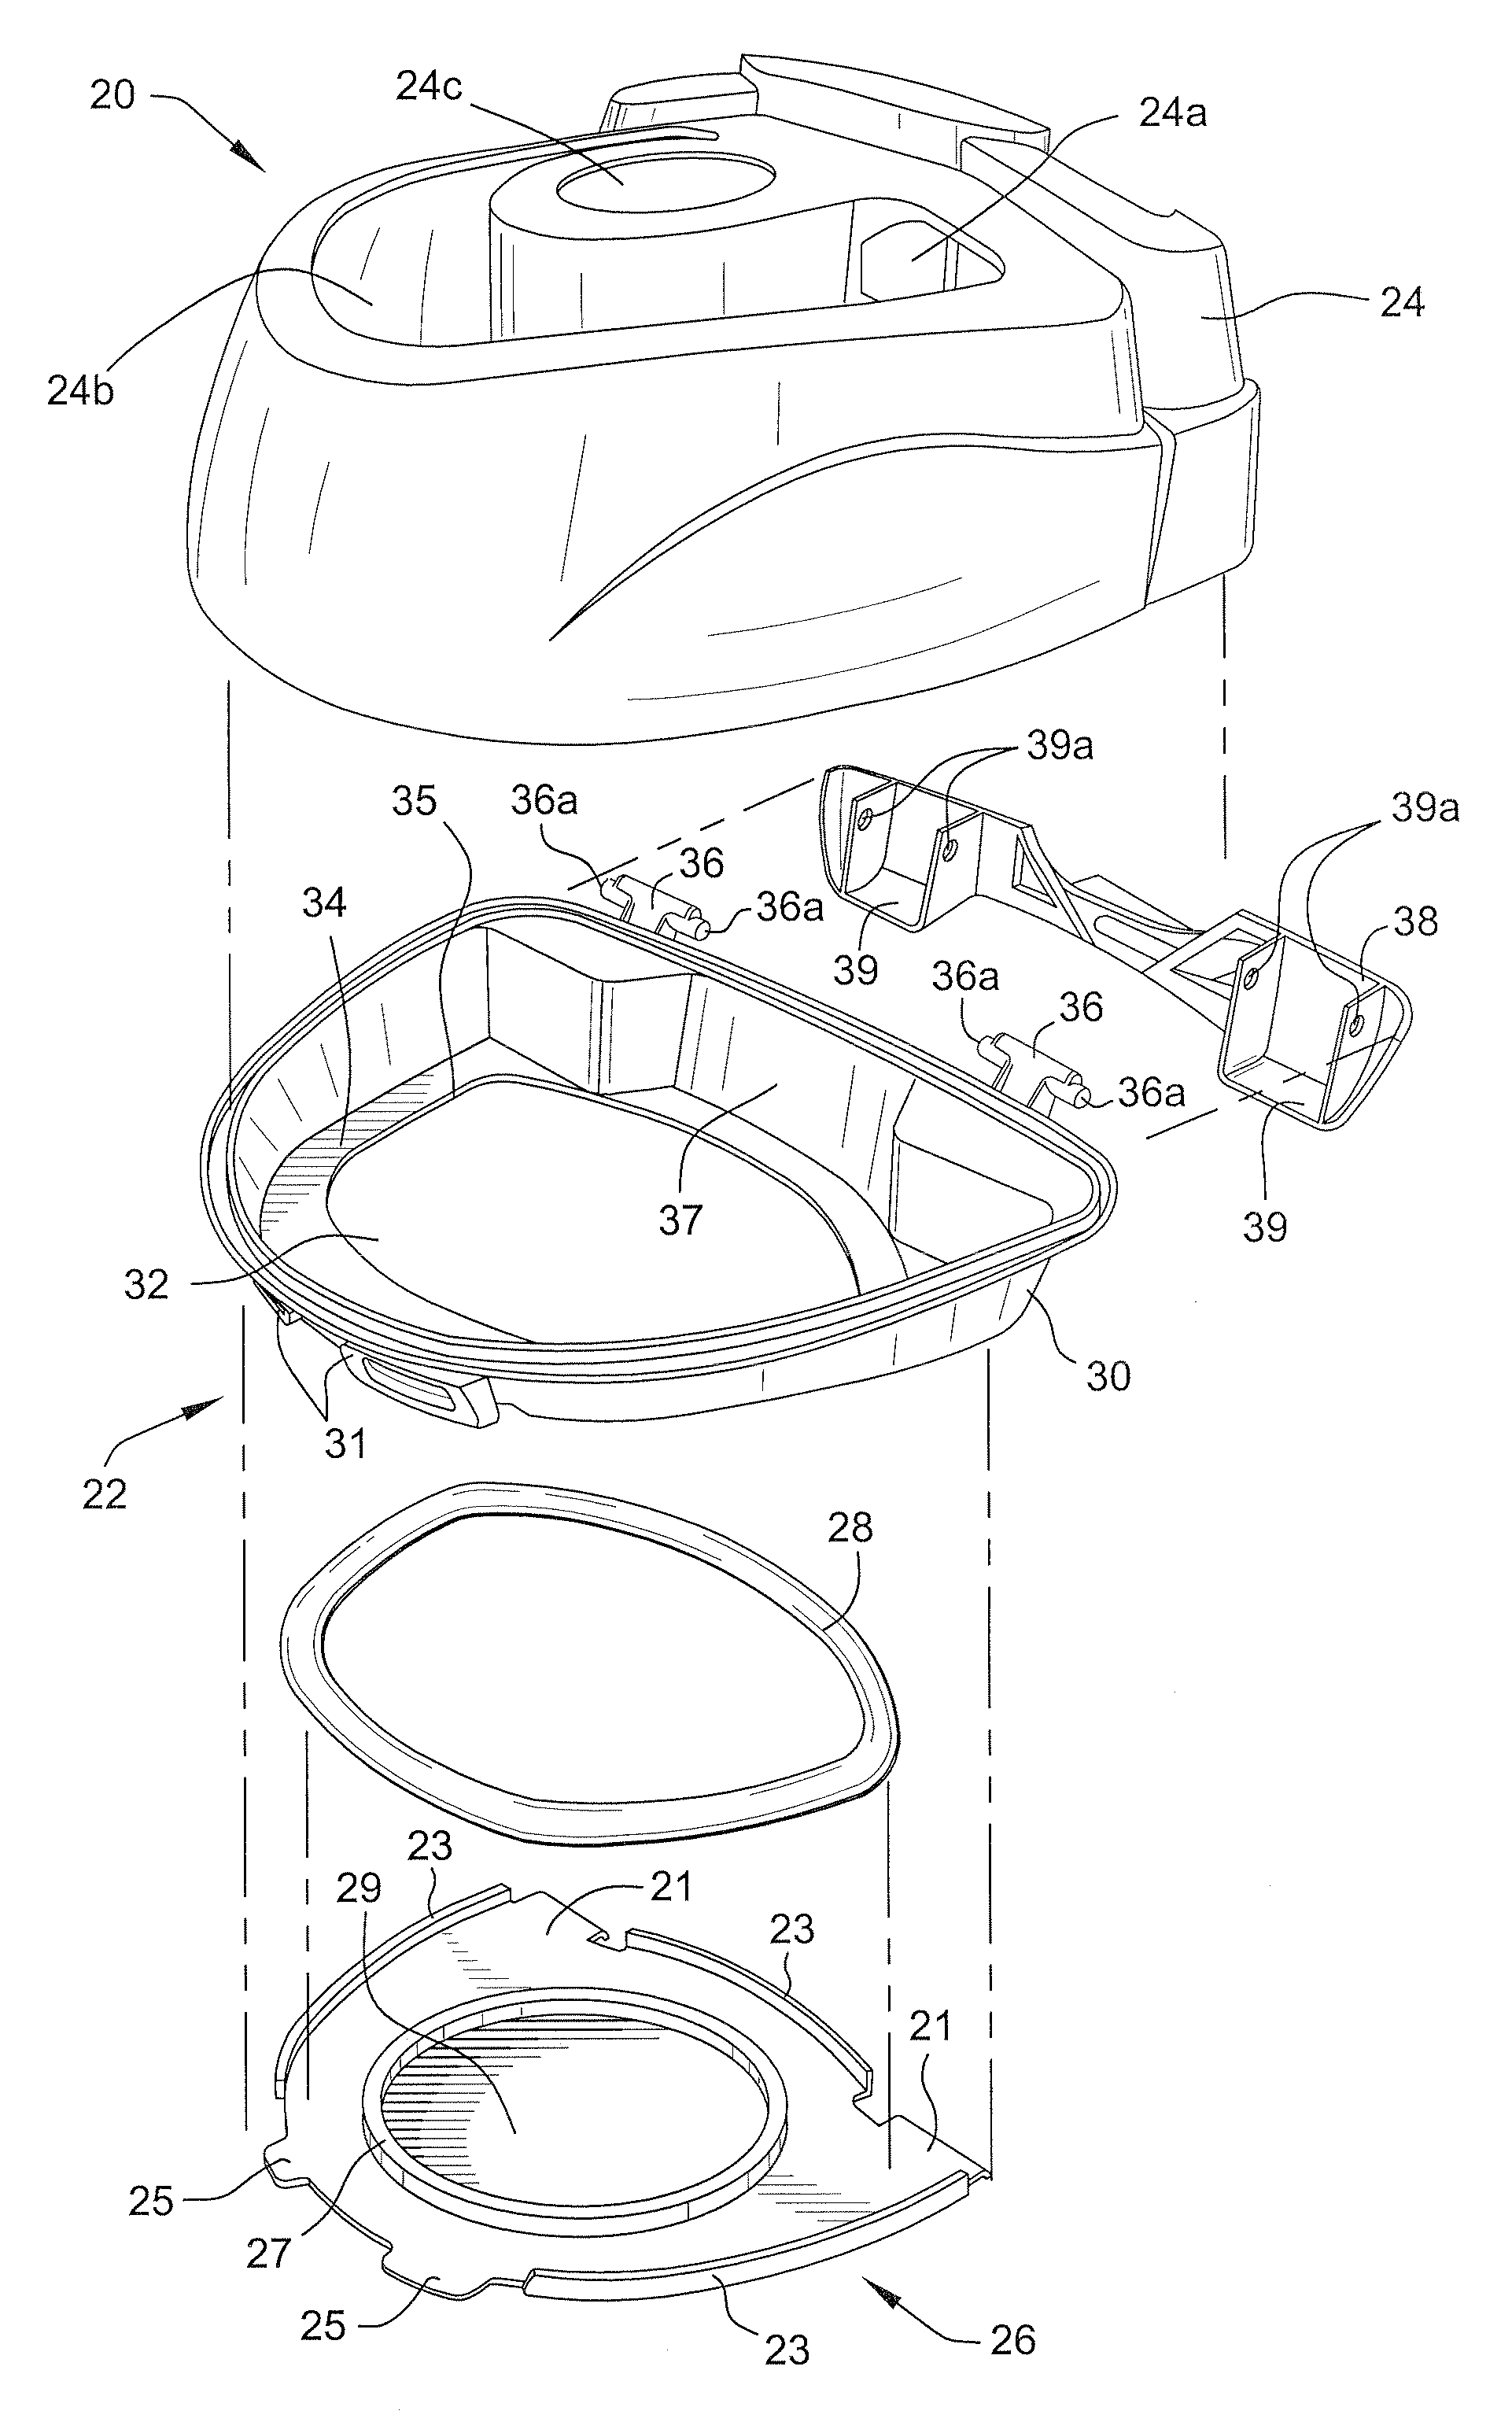 Tub for humidifier